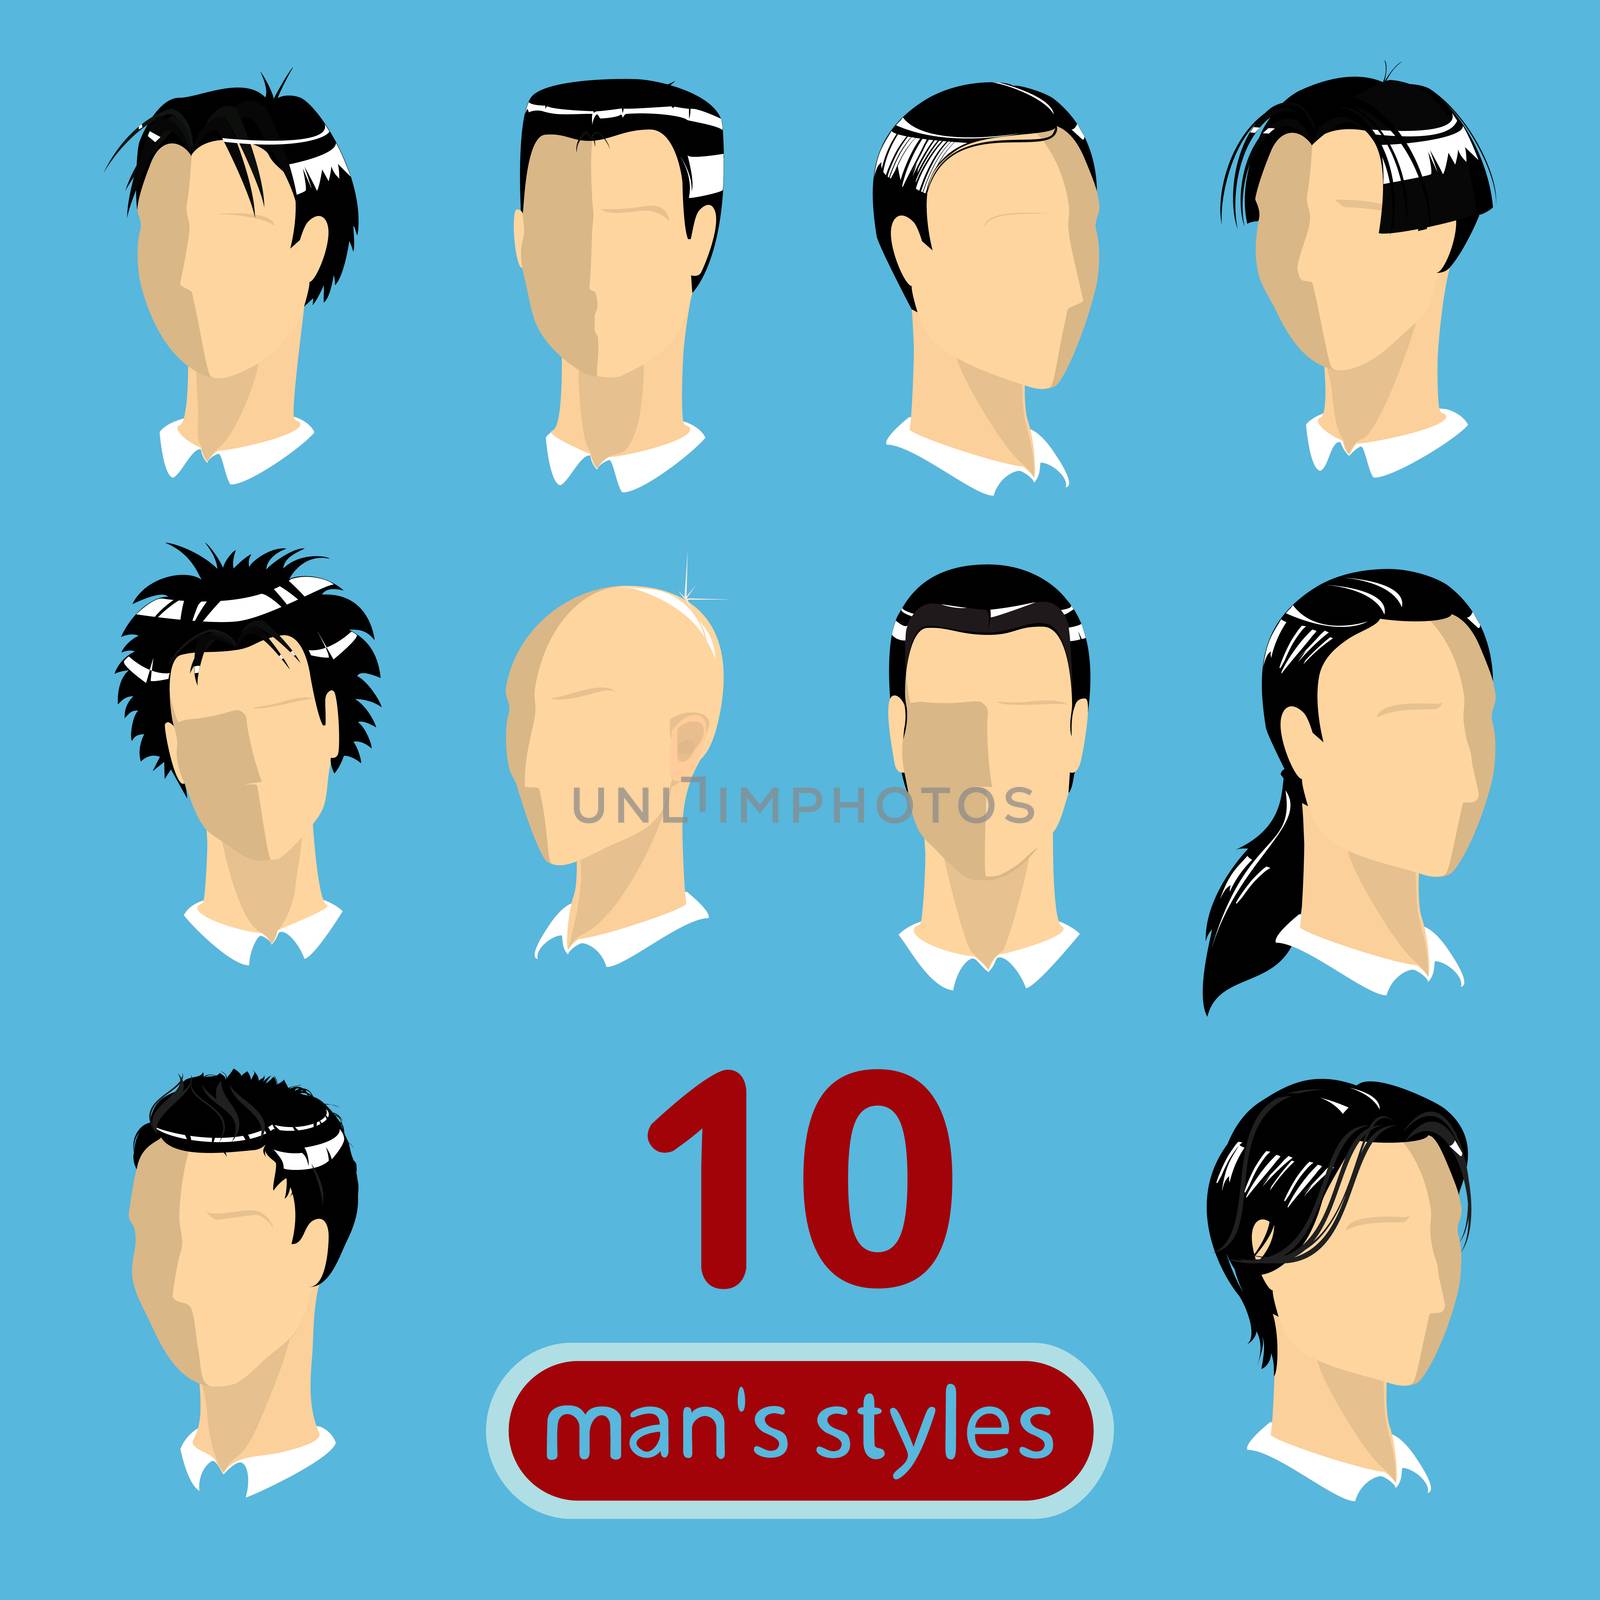 10 men's hairstyles by Rogalevv